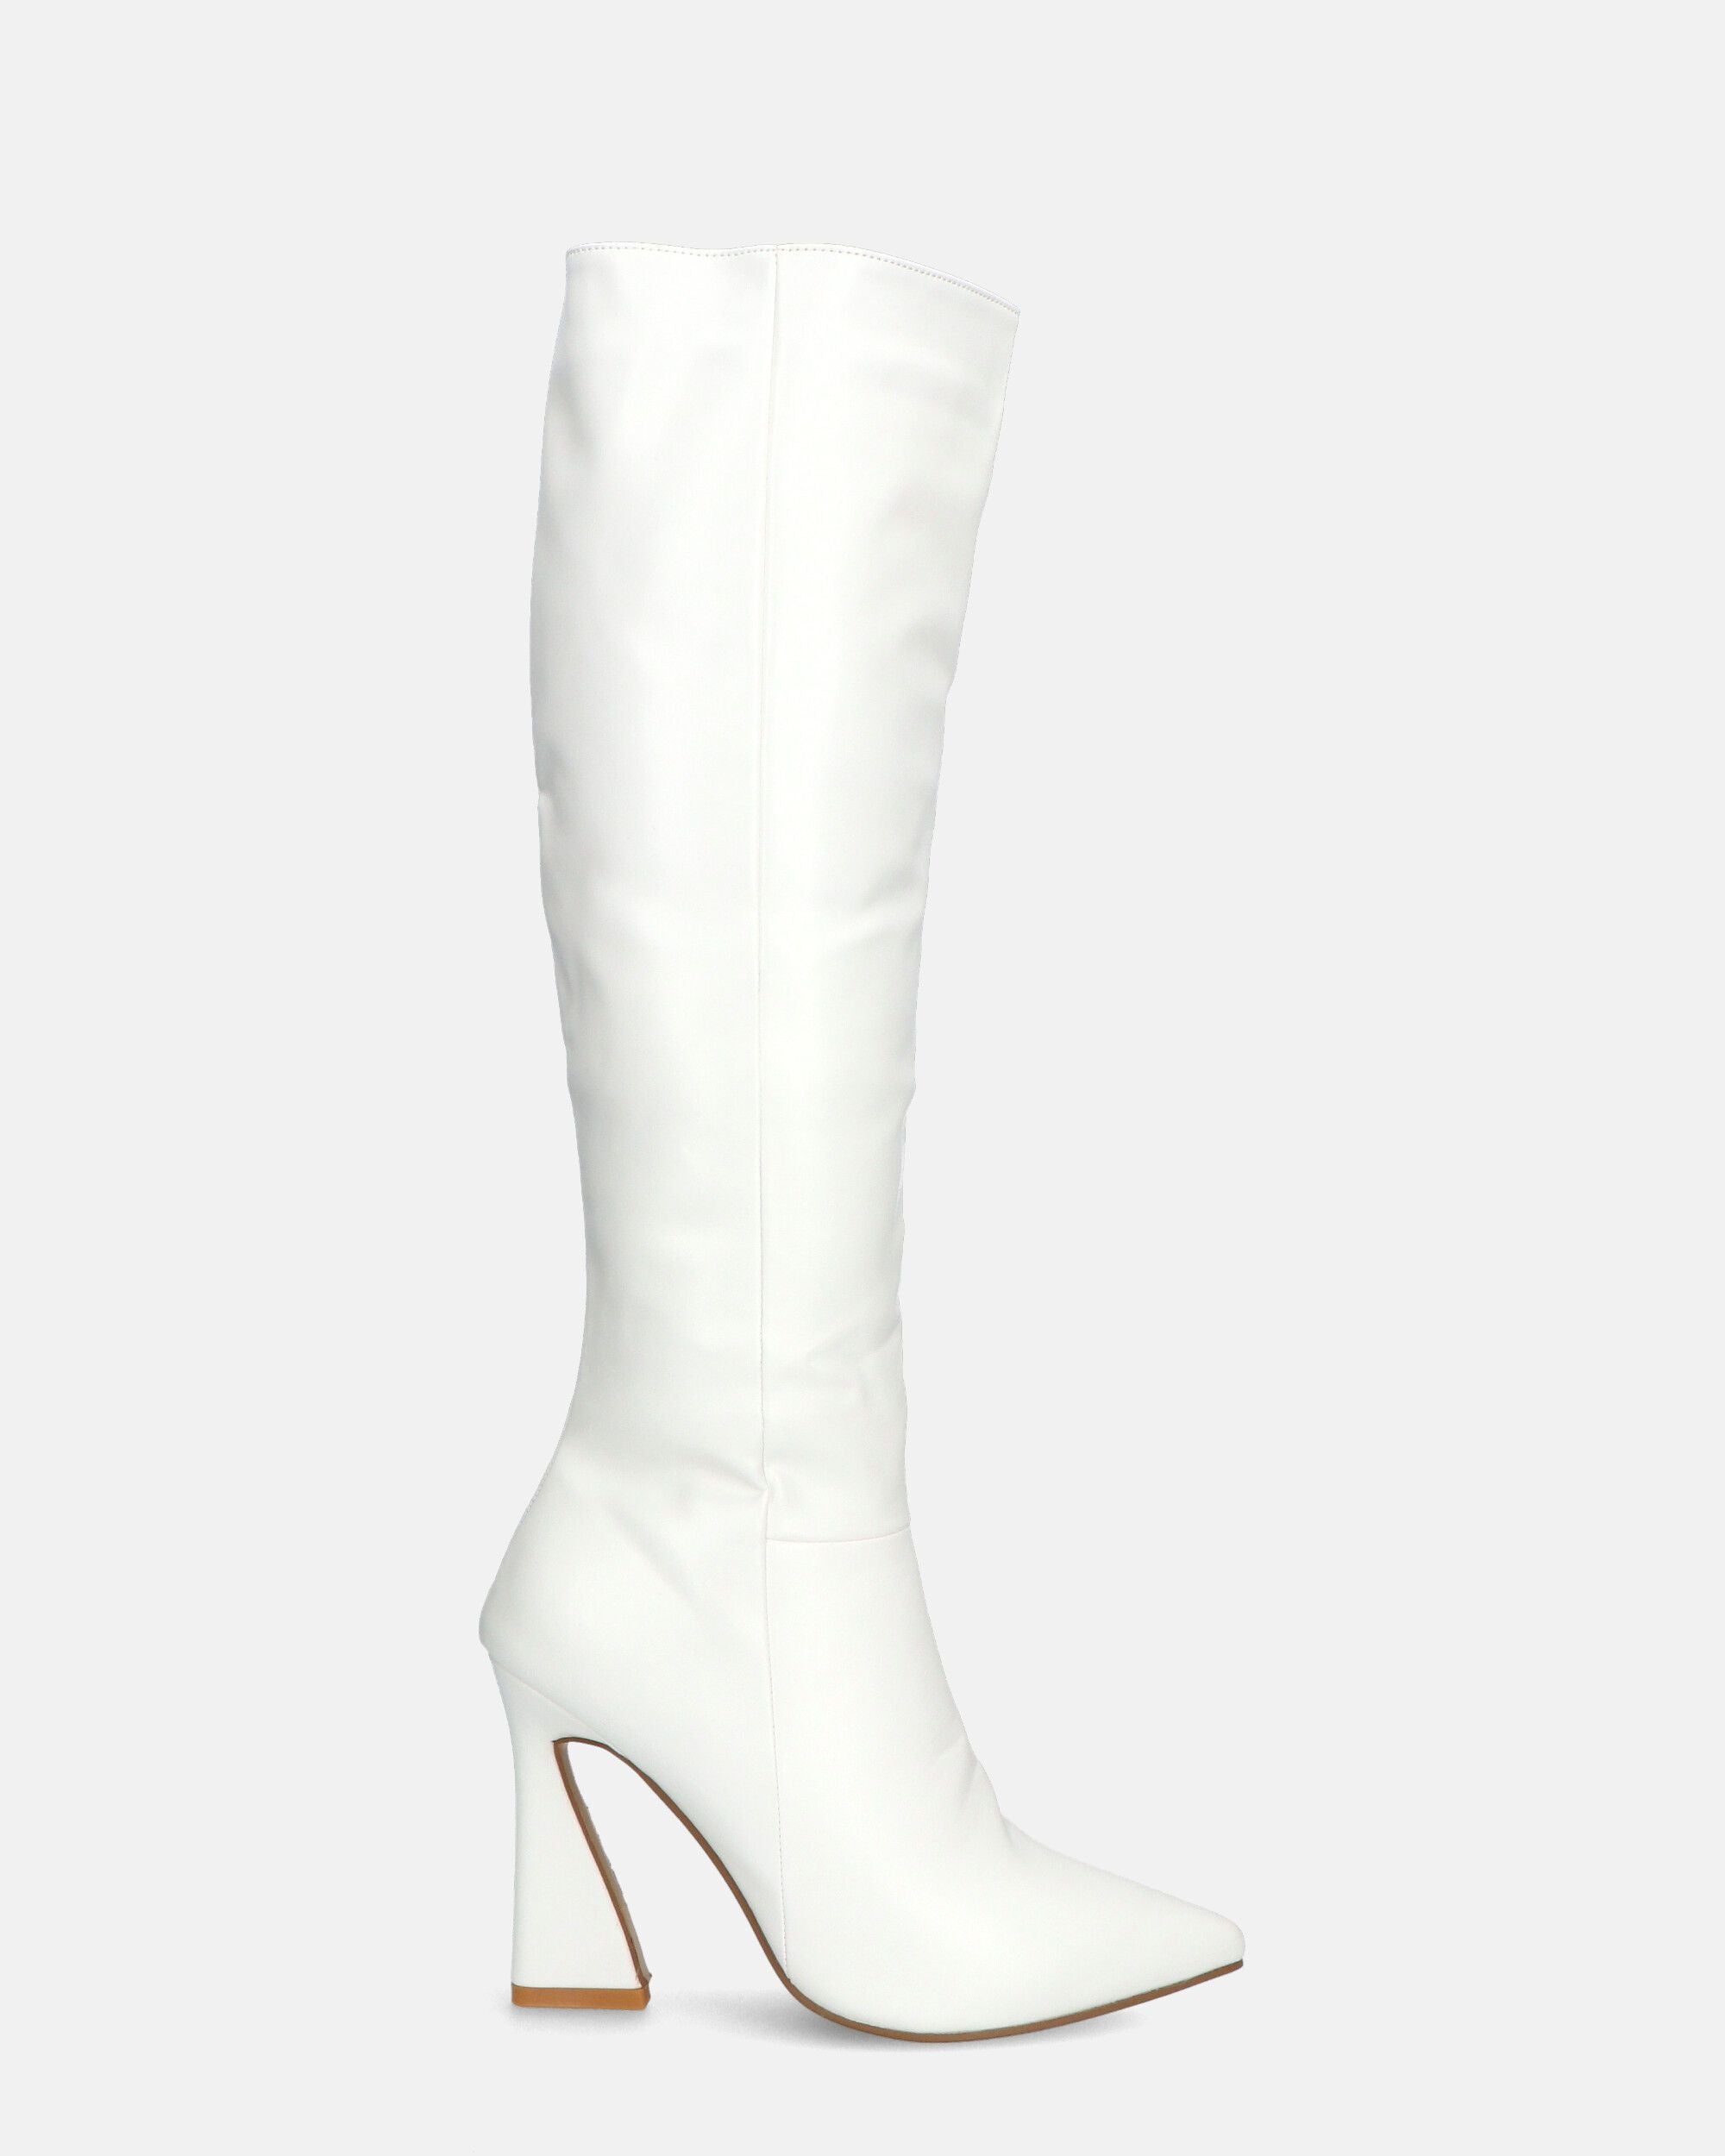 KELLY - white high boot with side zip